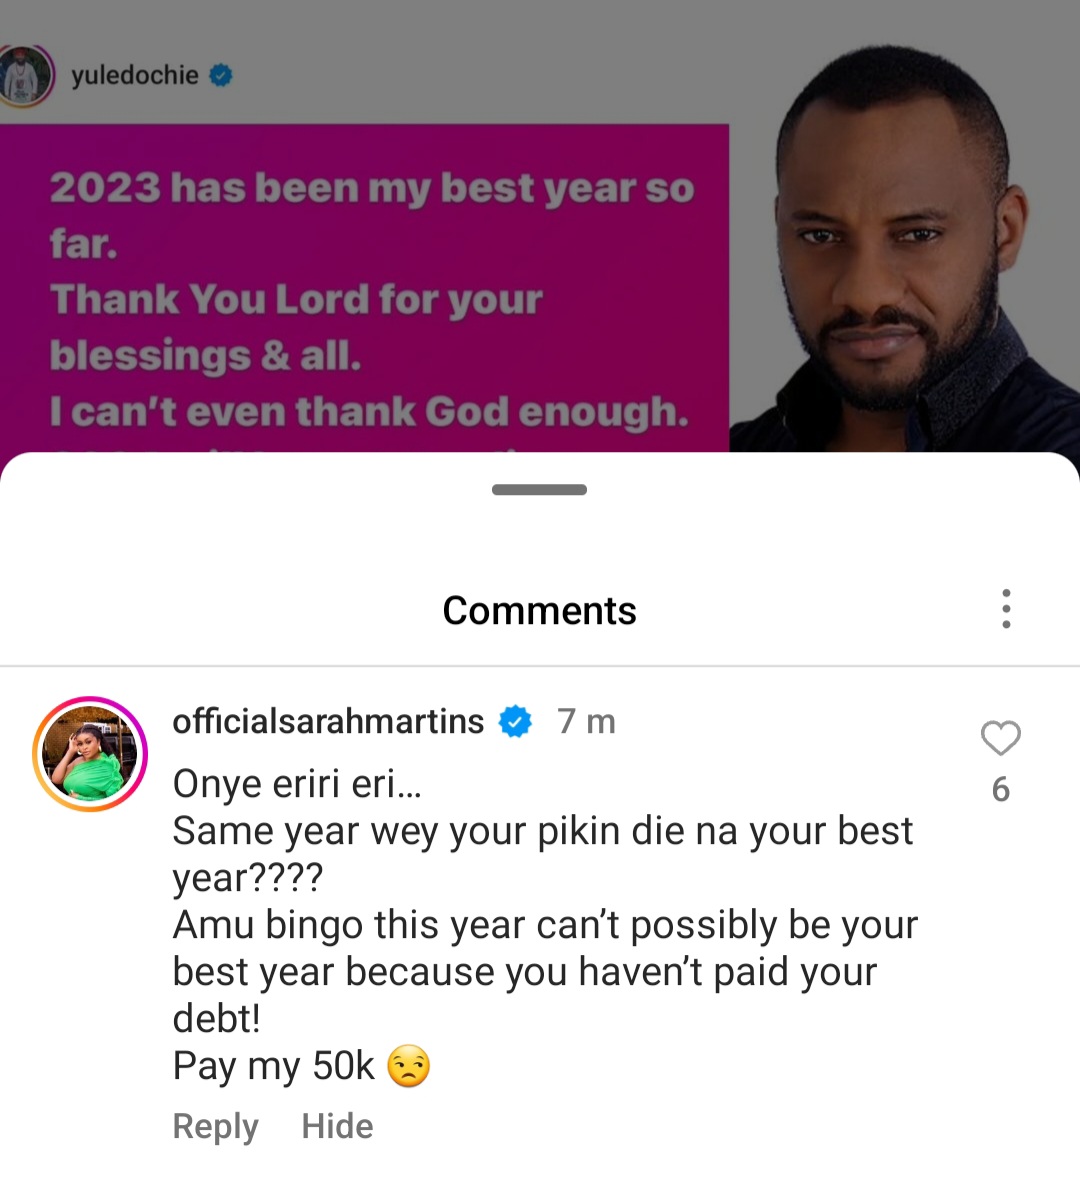 Pay my 50k. The year your son died is your best year? ? Sarah Martins slams Yul Edochie for saying 2023 is his best year